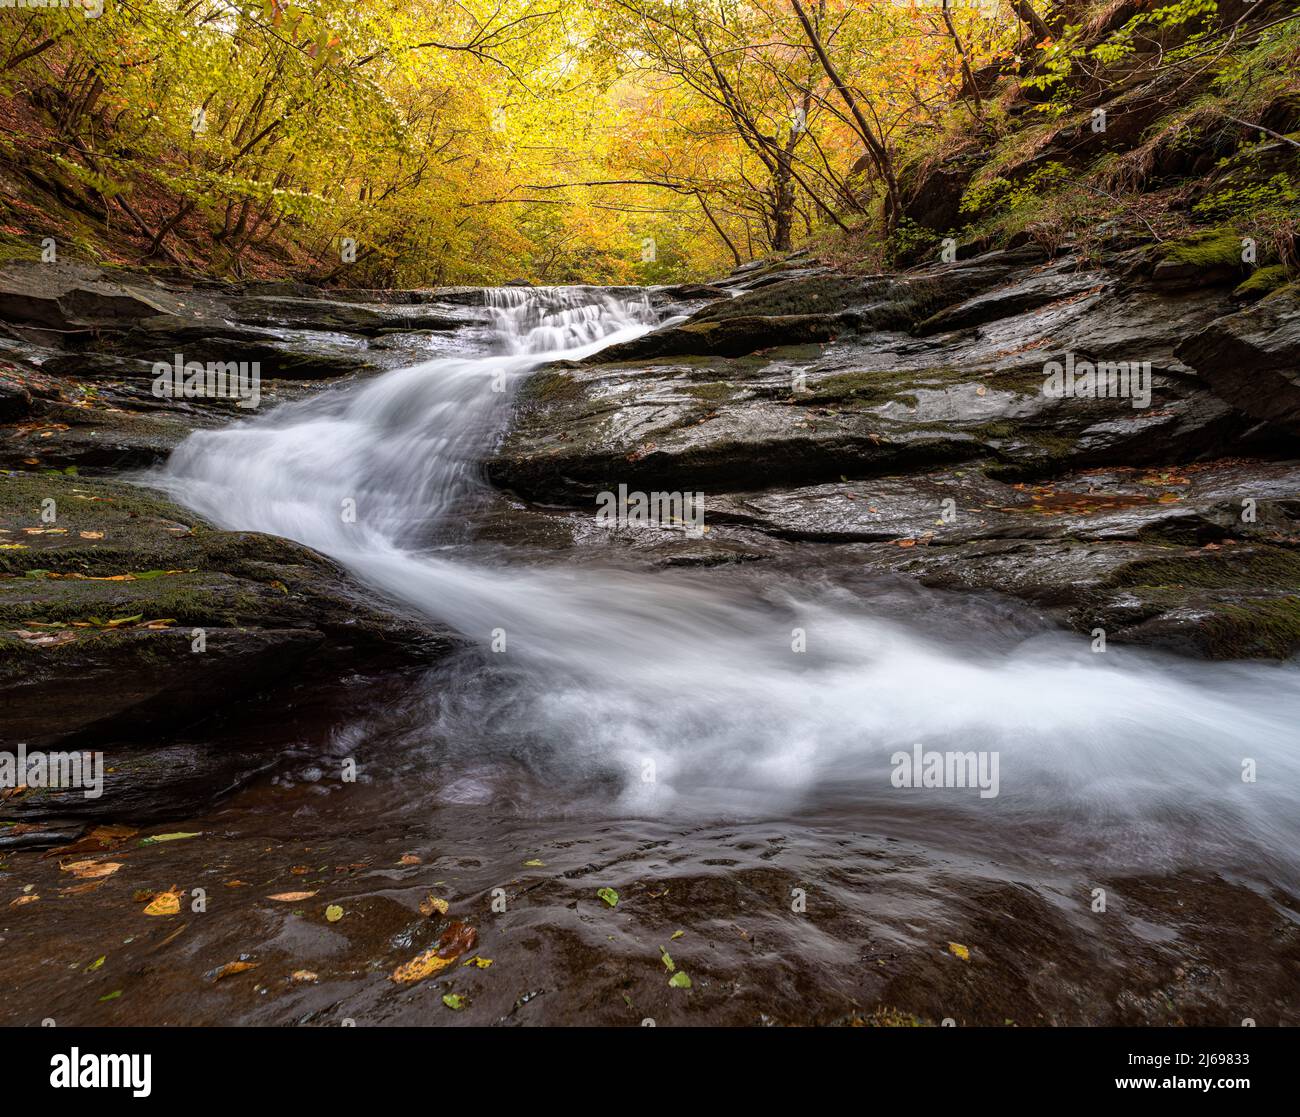 Autumn colors in a beech wood with a waterfall flowing between rocks, long exposure, Emilia Romagna, Italy, Europe Stock Photo